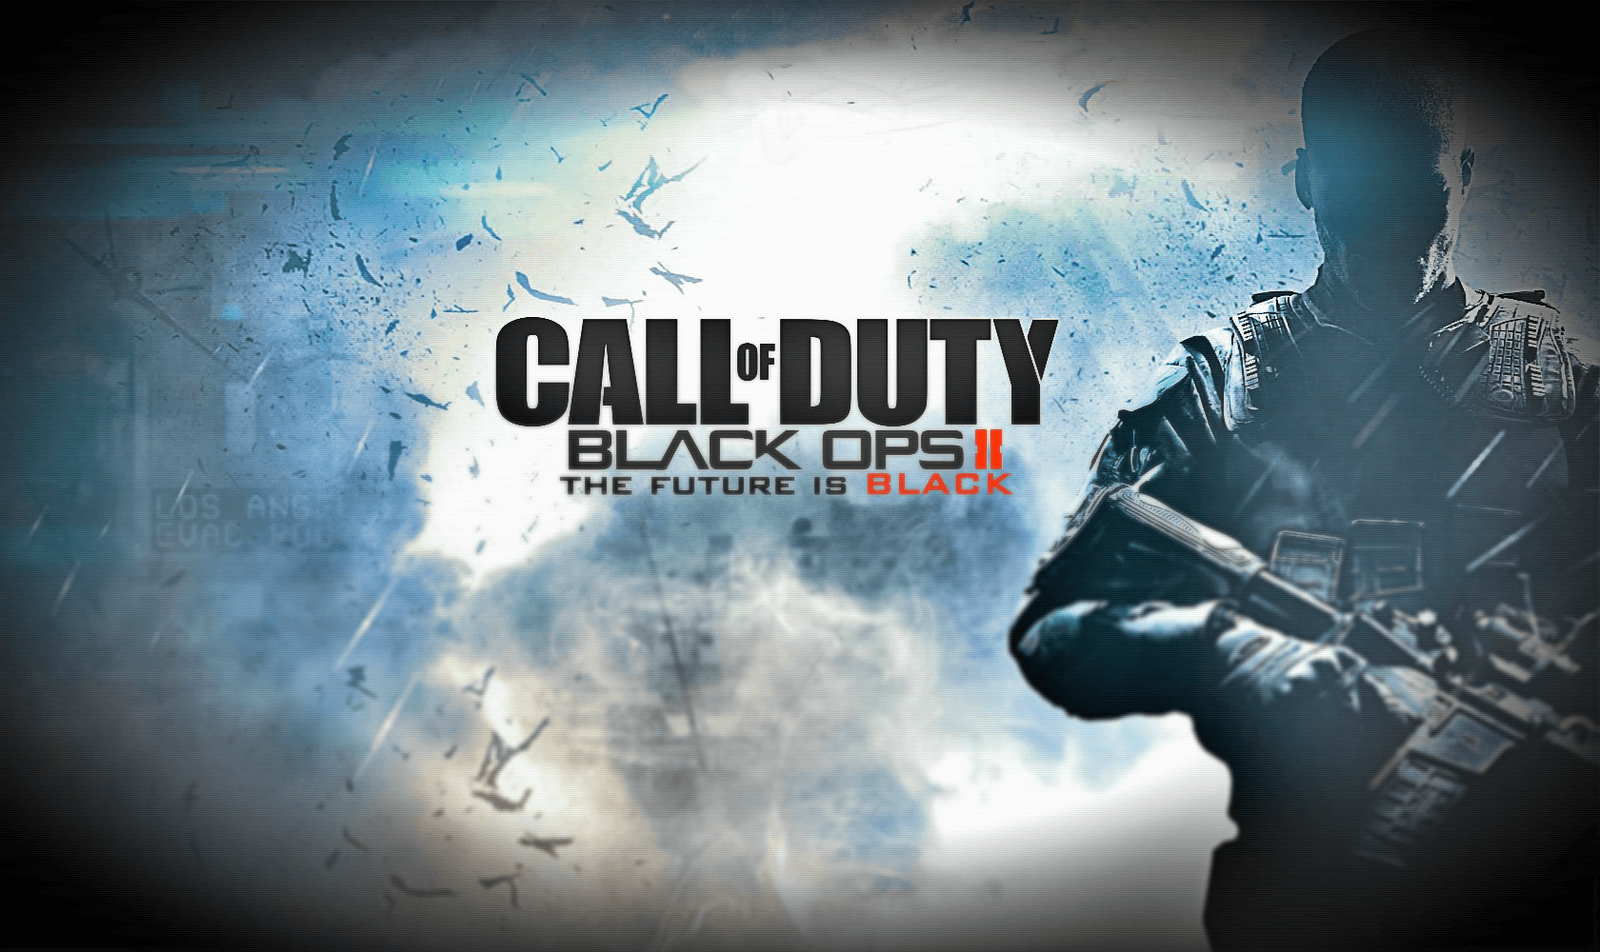 Download HD WALLPAPERS Call of Duty Black ops 2 HD Wallpaper